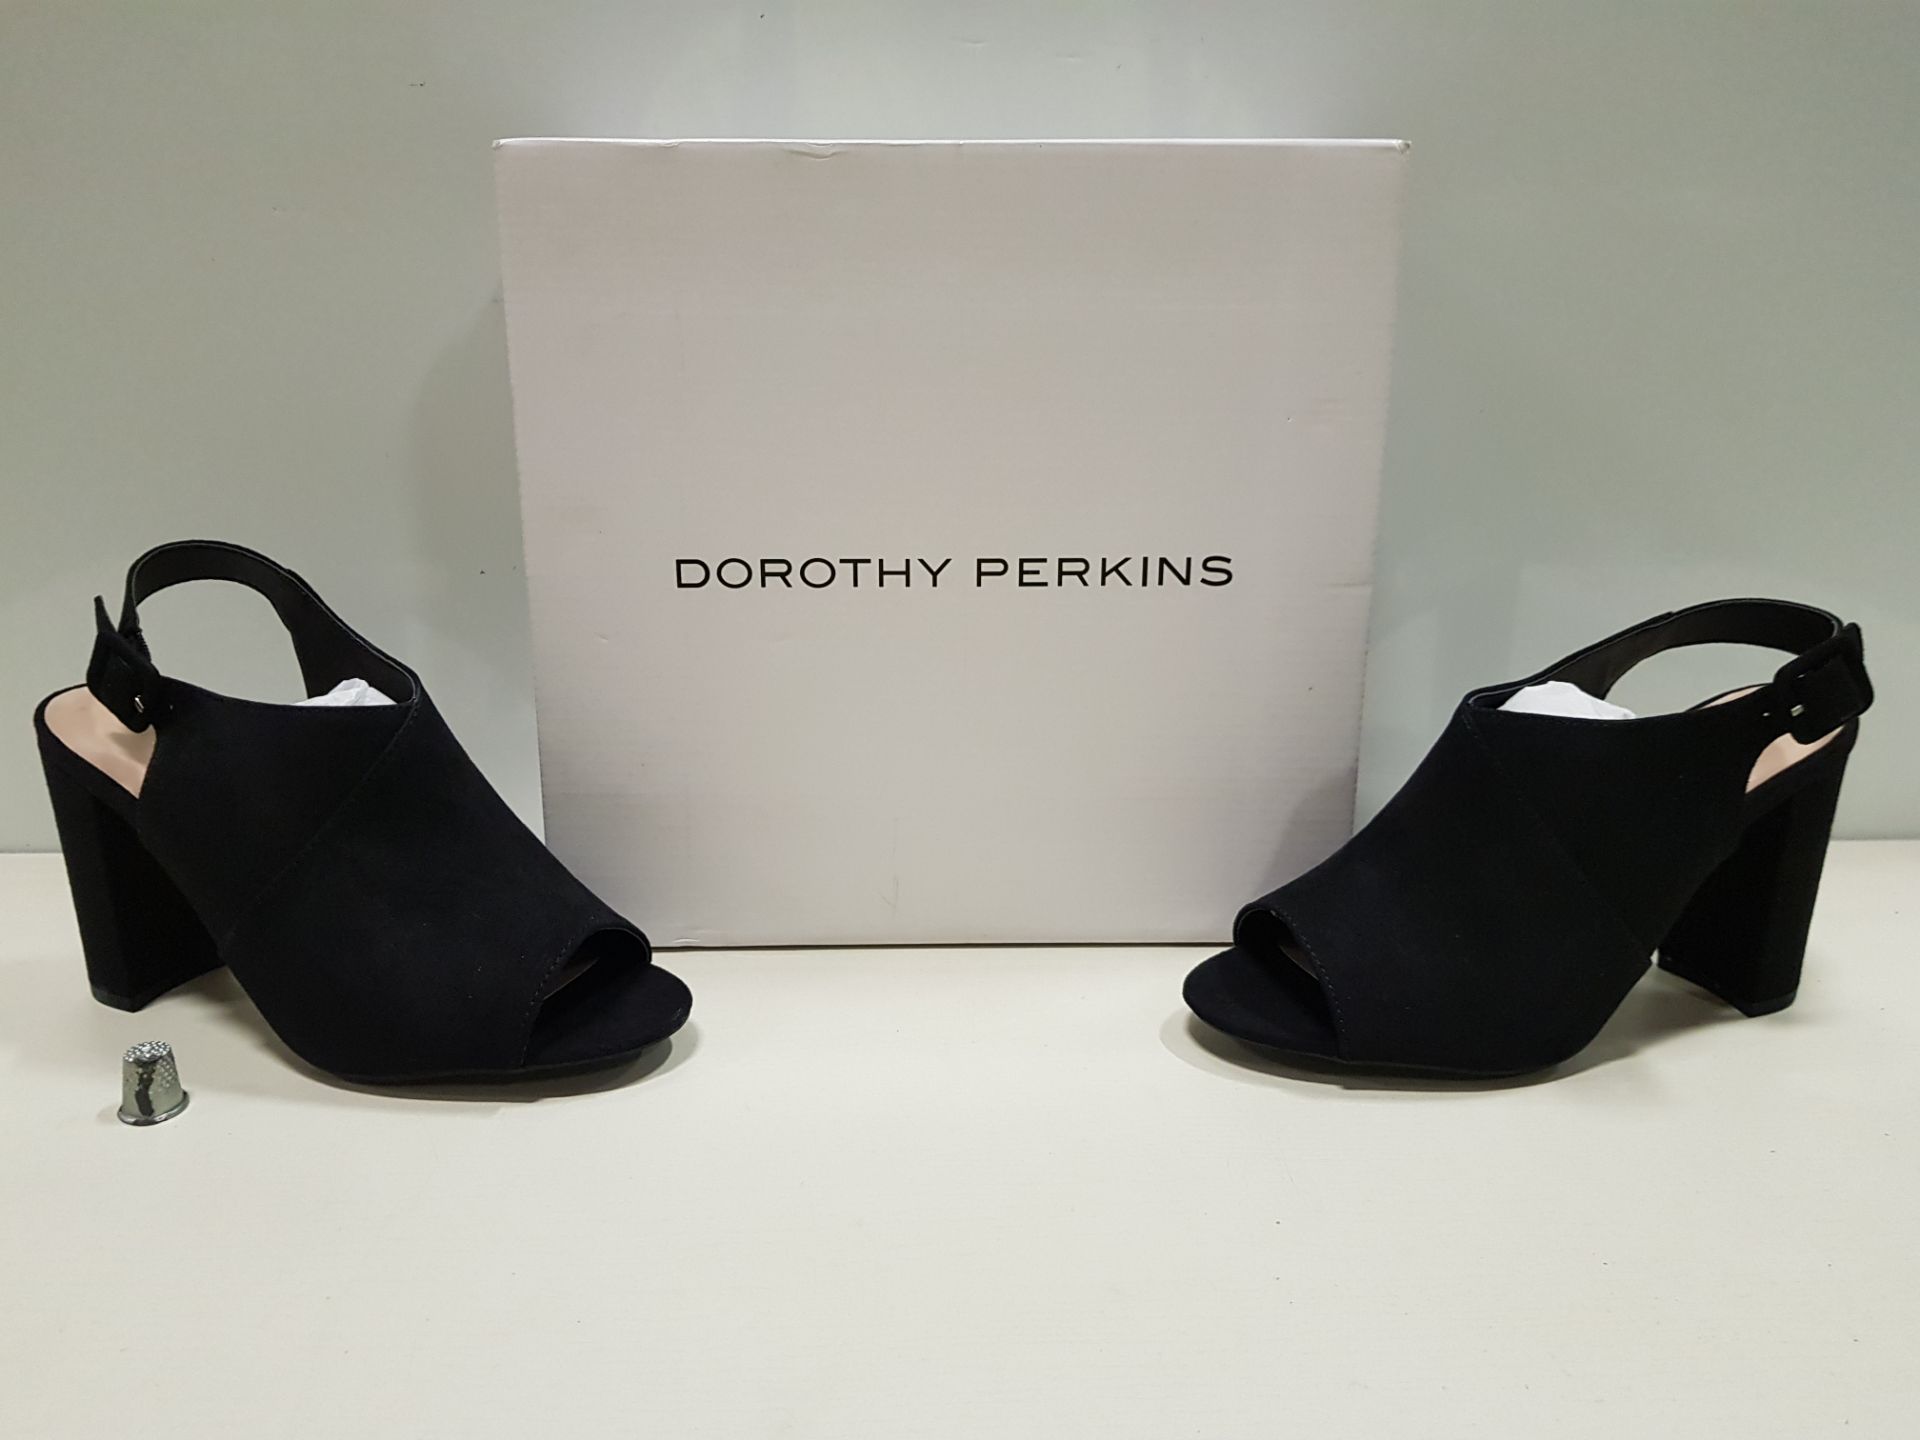 16 X PAIRS OF BRAND NEW DOROTHY PERKINS BLACK SAVO HEELED SANDAL SHOES RRP £28 PP TOTAL £448 - UK